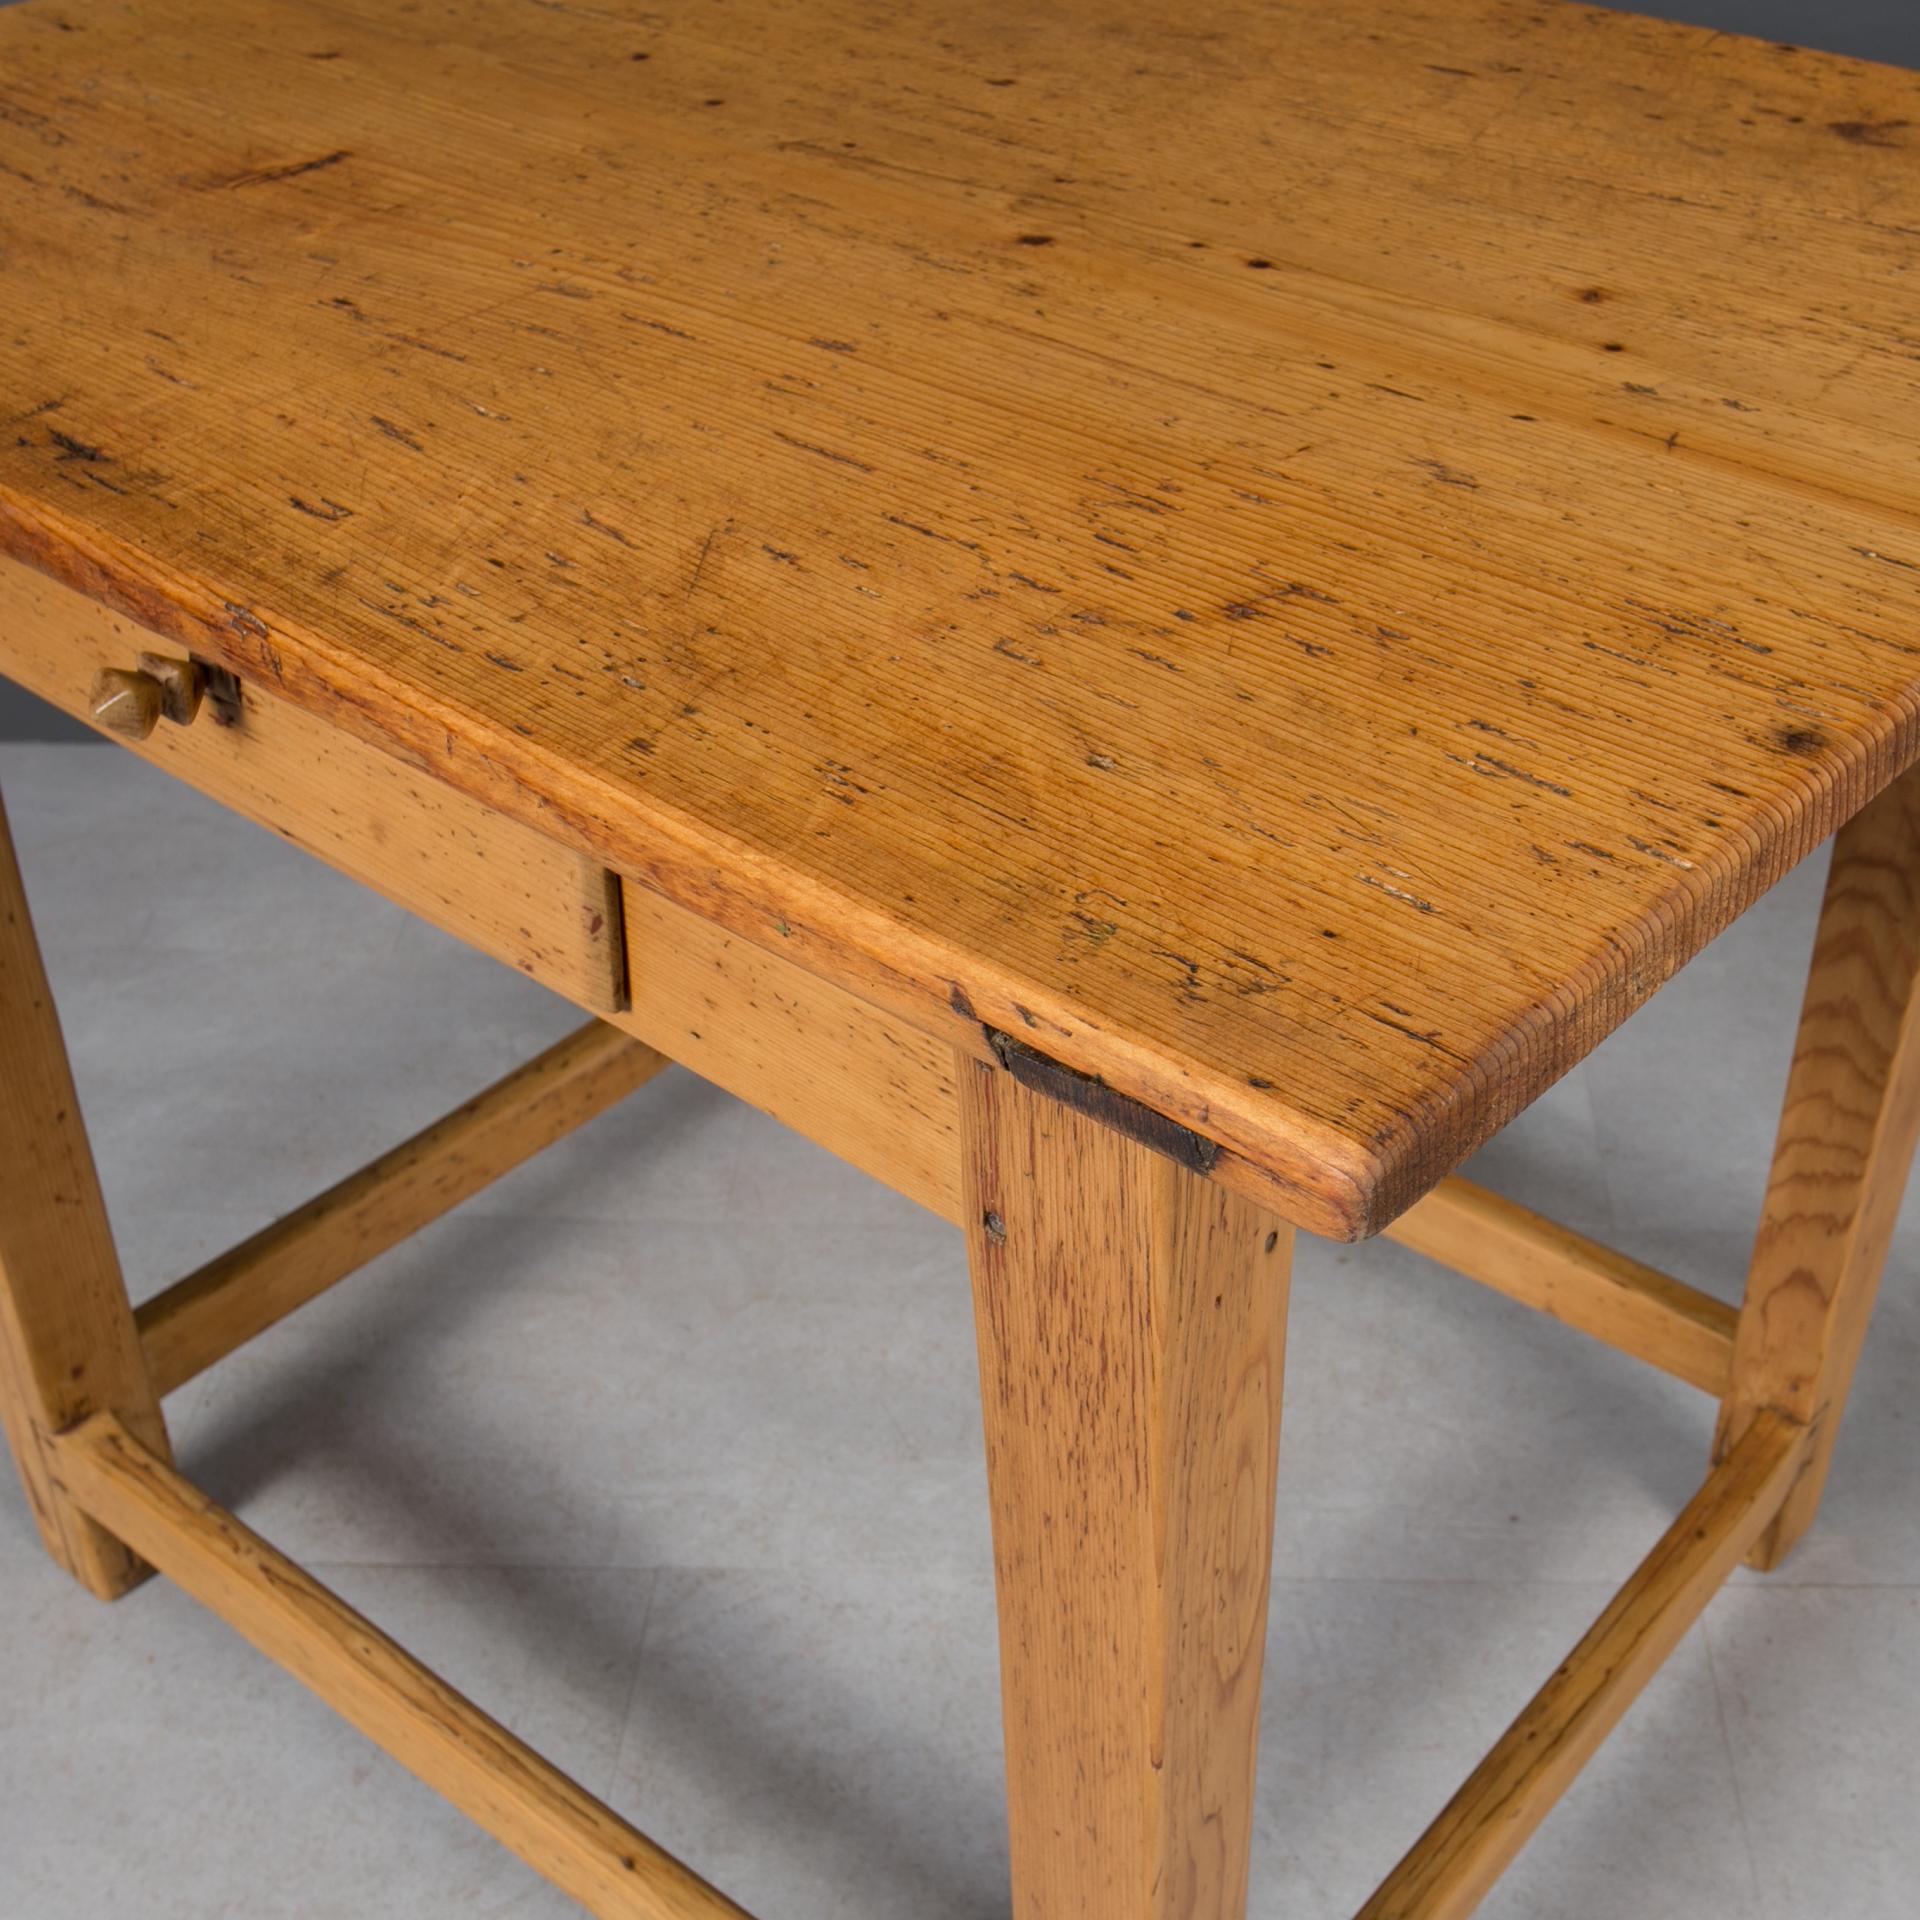 Vintage Pine Wood Table, Rustic Style, Prep or Dining Table, Kitchen Island For Sale 8